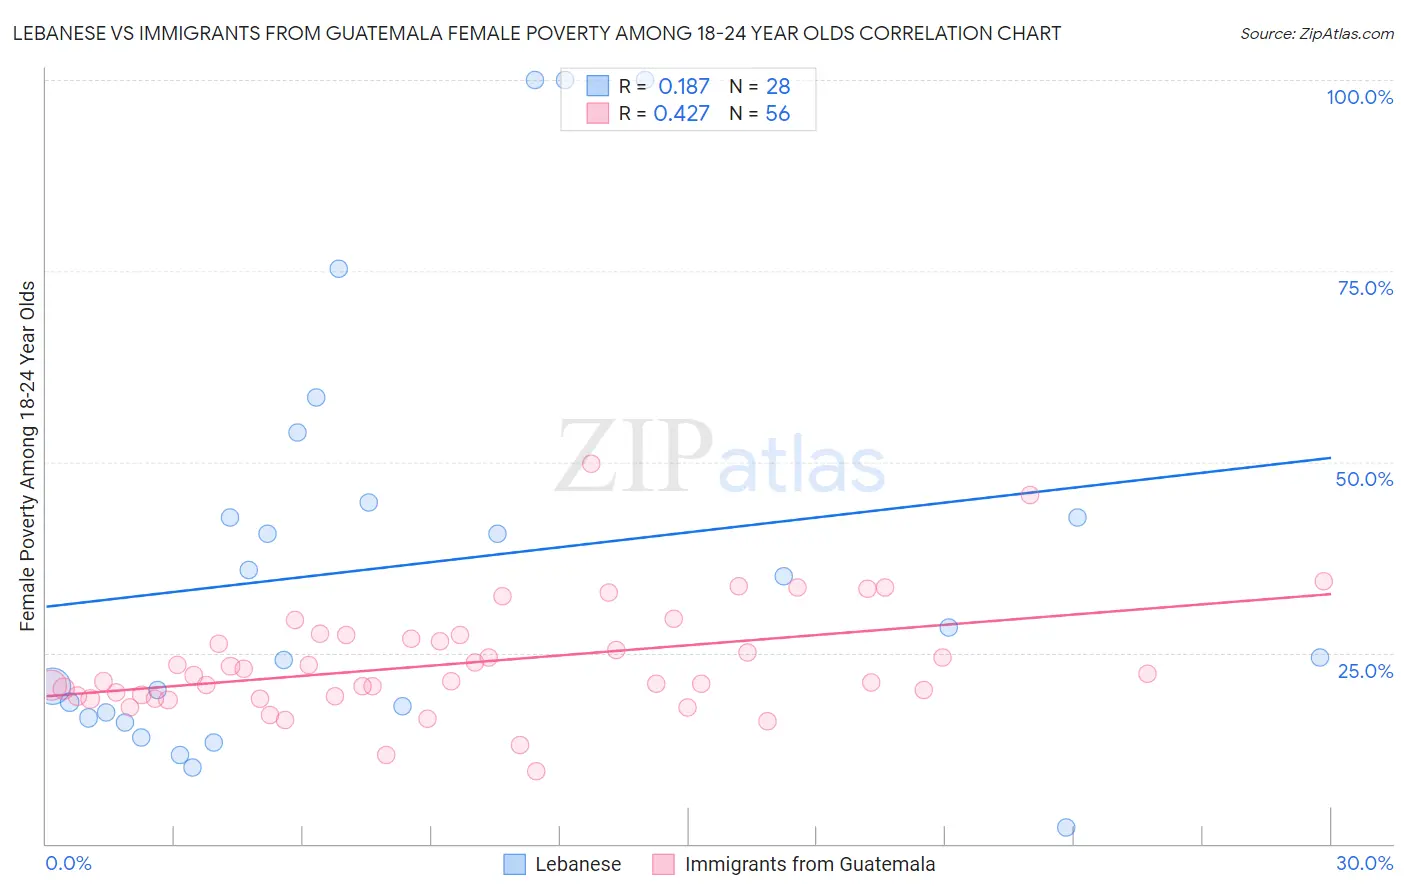 Lebanese vs Immigrants from Guatemala Female Poverty Among 18-24 Year Olds